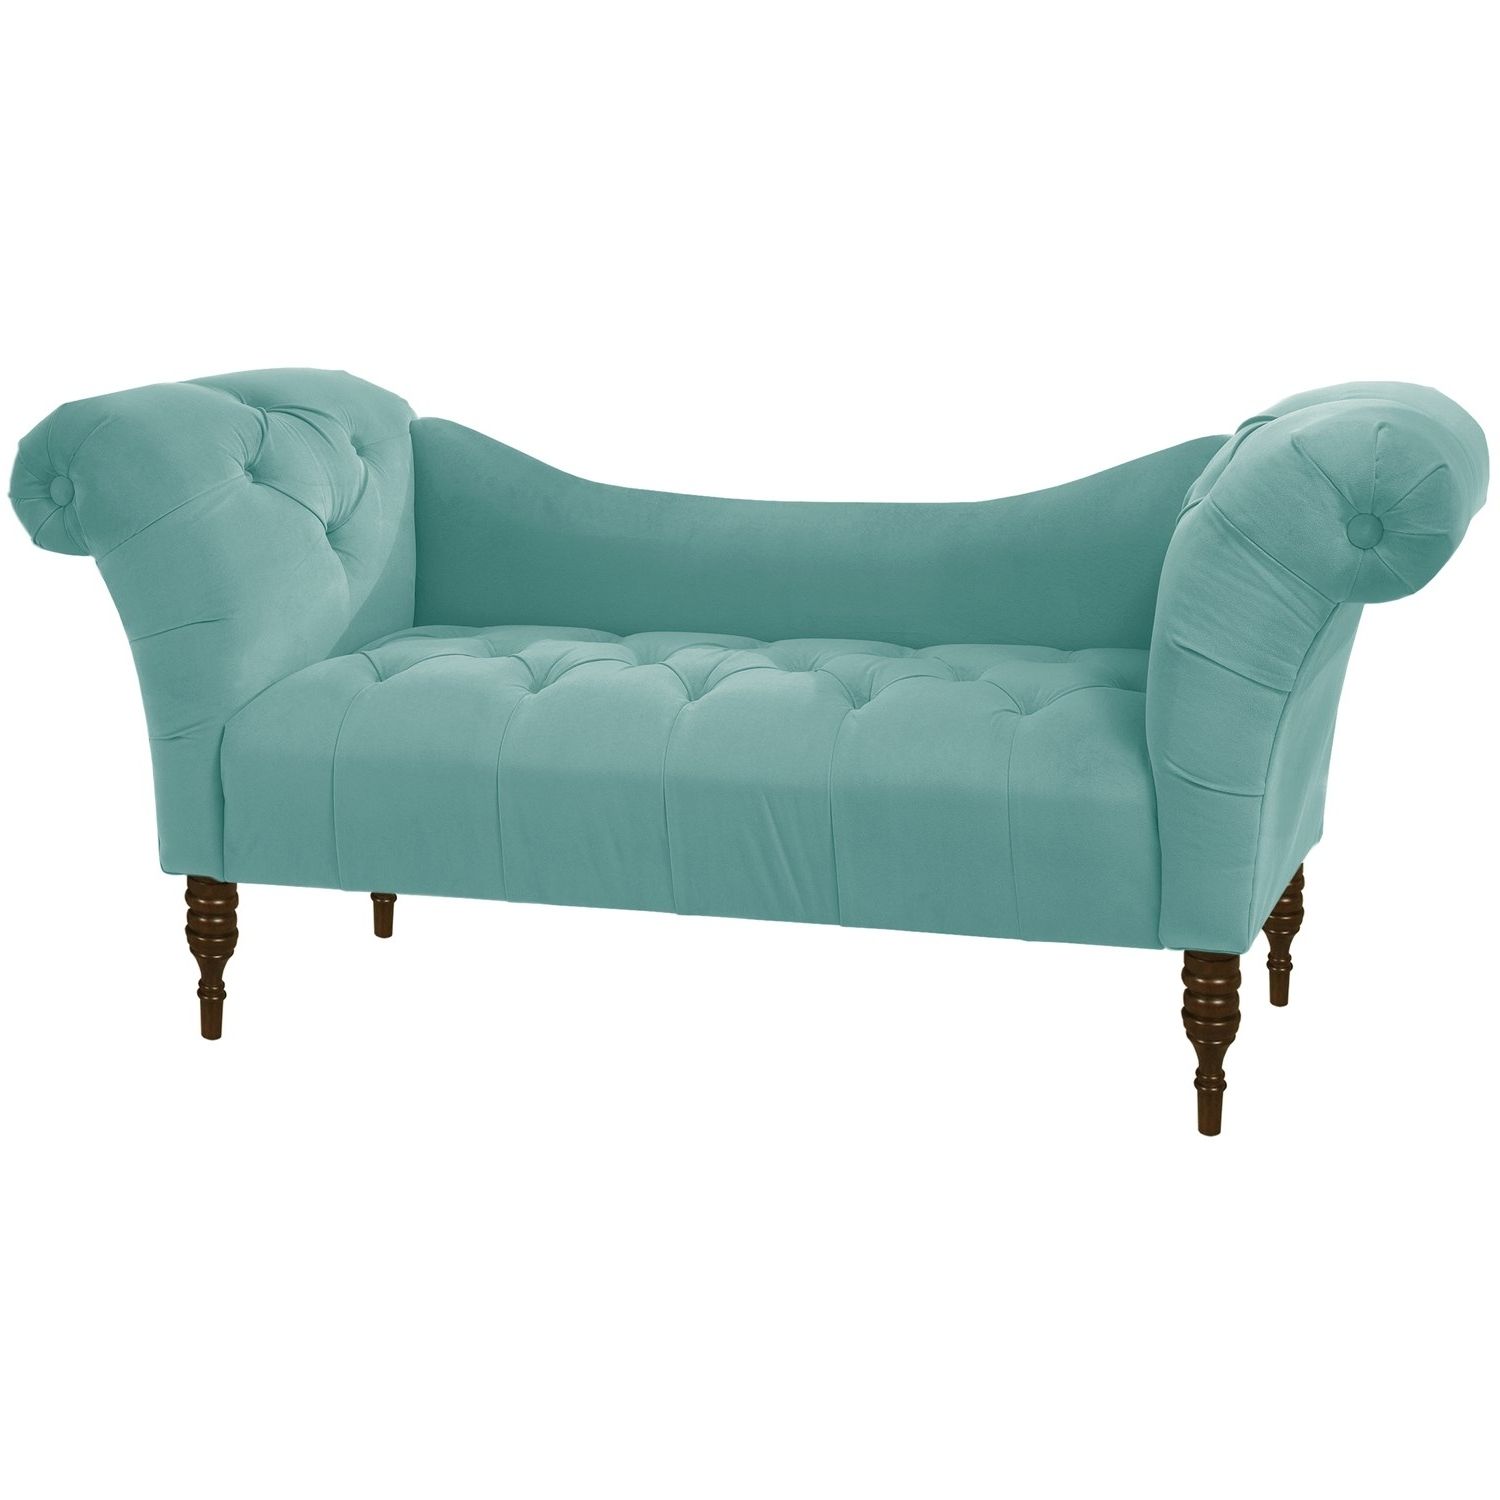 Famous Skyline 6006vlv Tufted Chaise Lounge – Homeclick Regarding Teal Chaise Lounges (View 4 of 15)